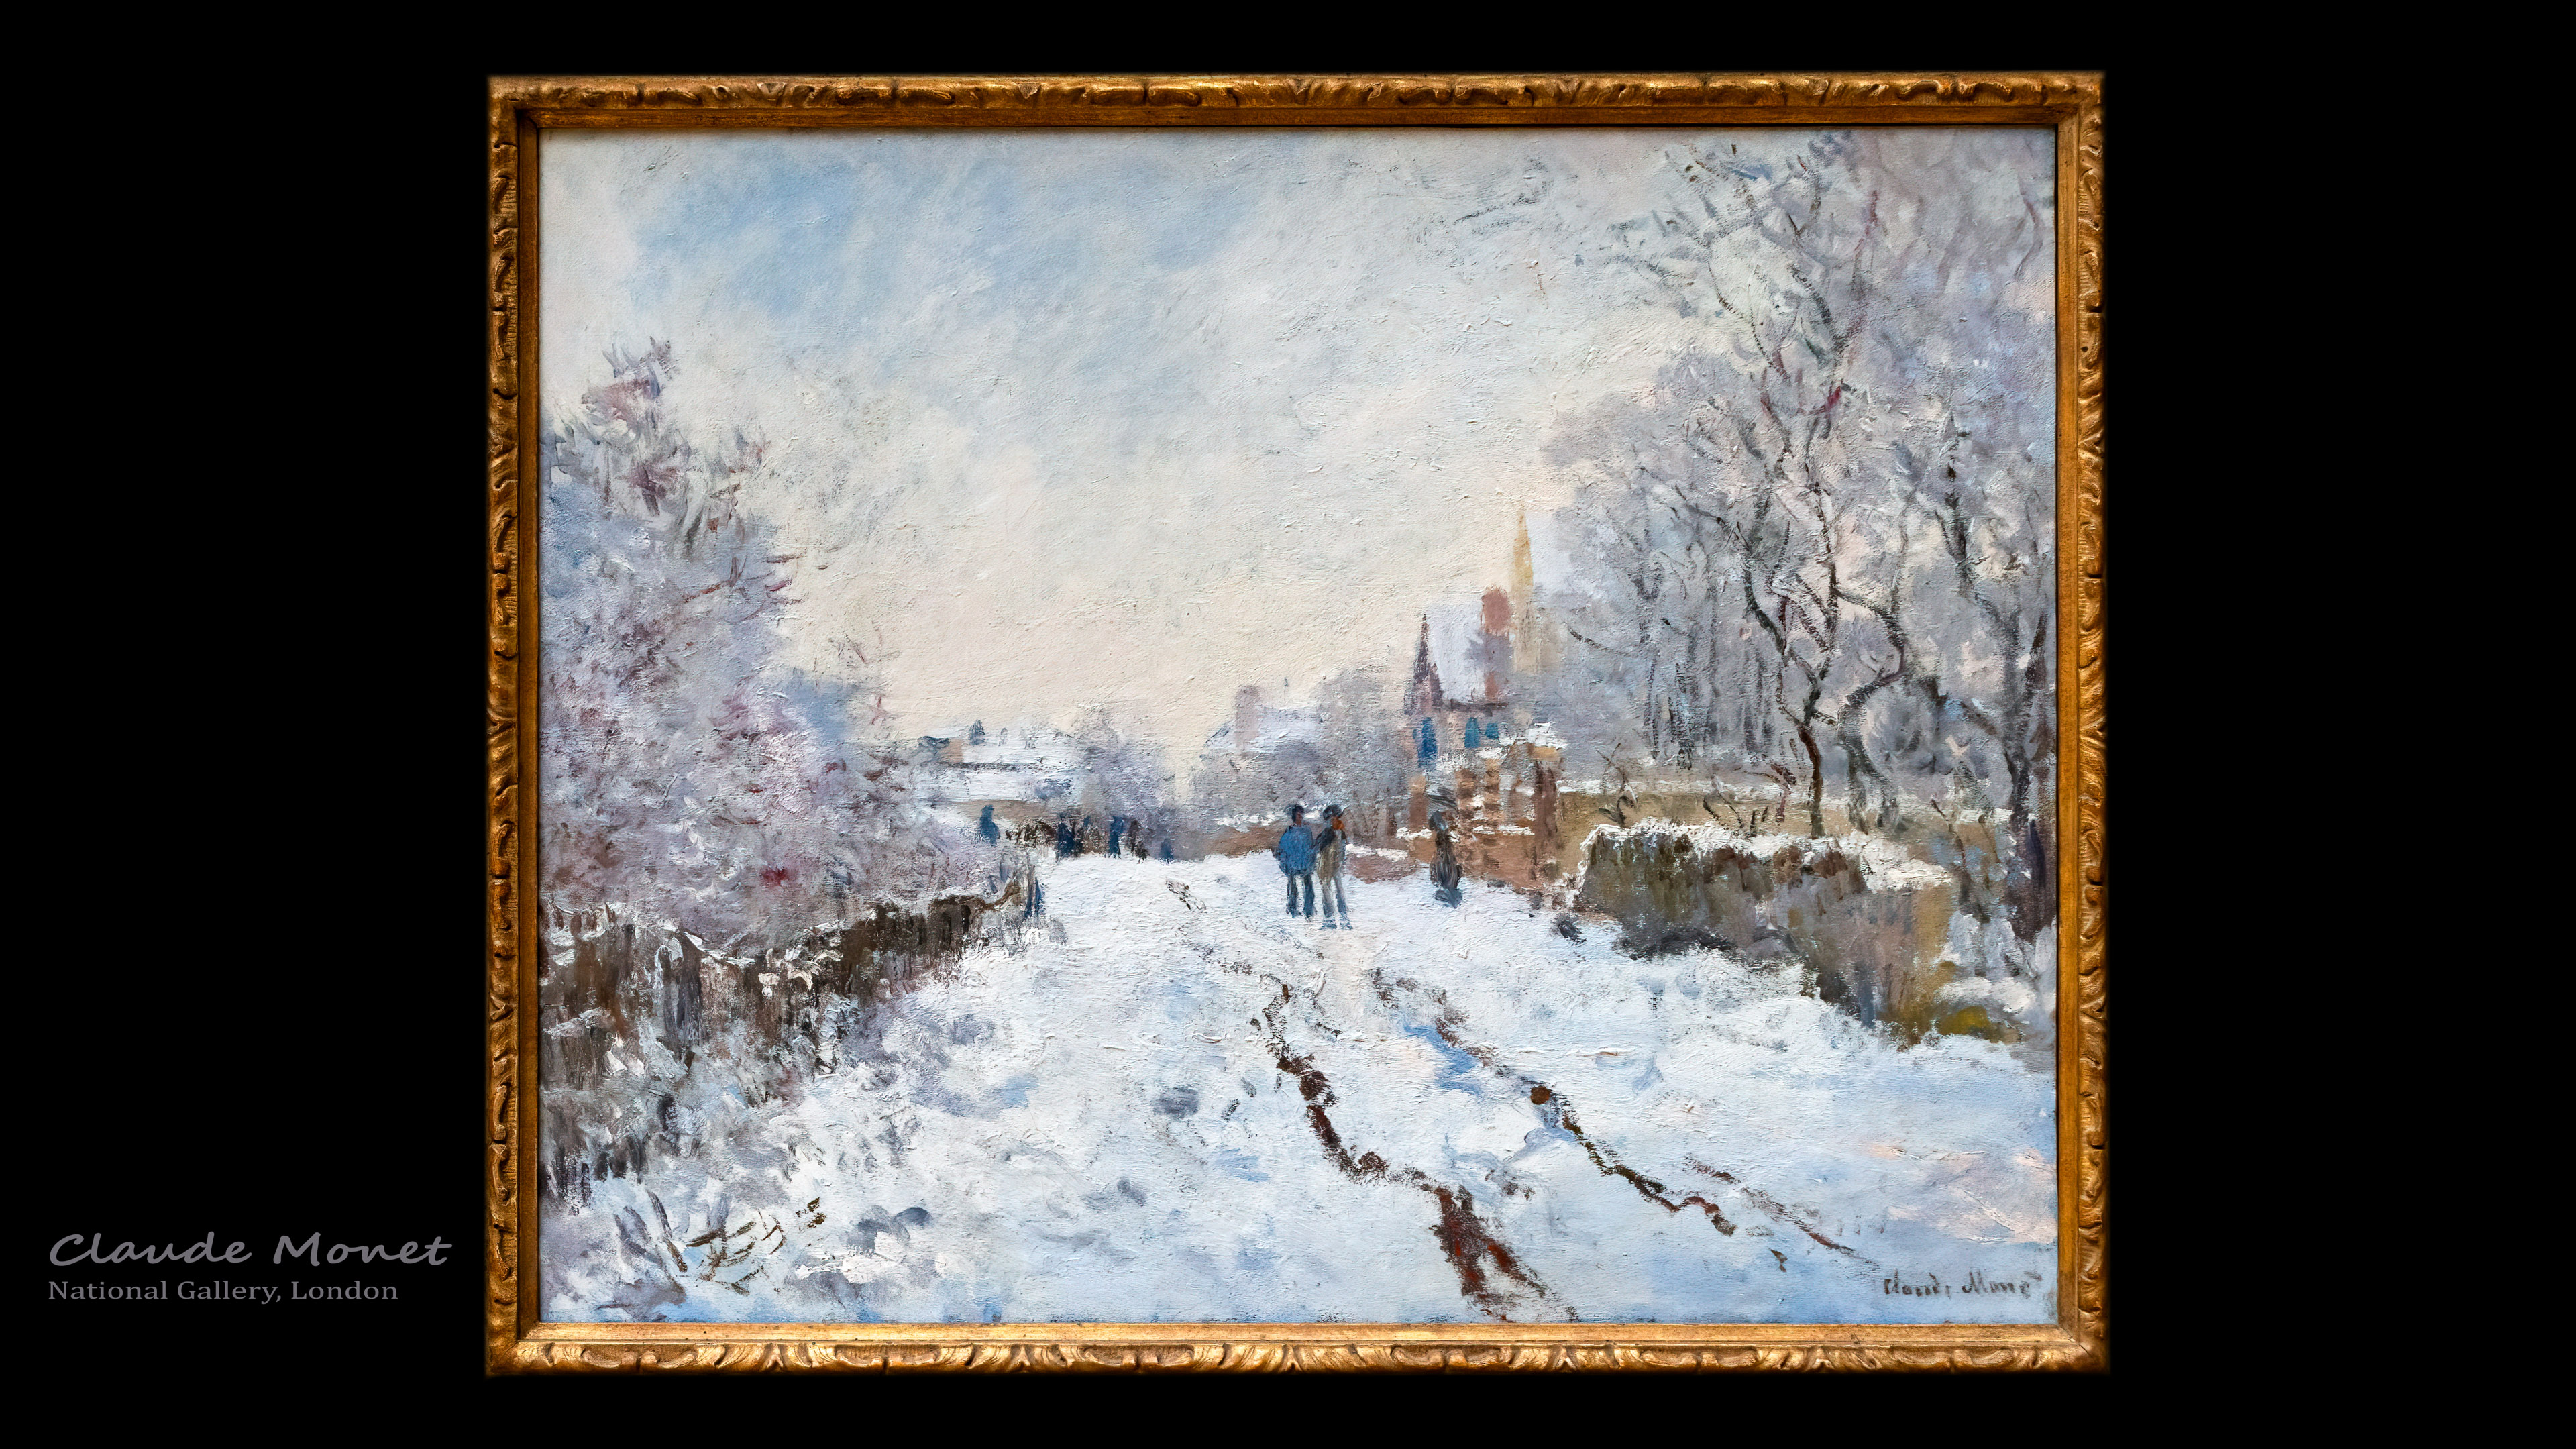 Immerse yourself in the serene beauty of winter with our Claude Monet 4k wallpaper